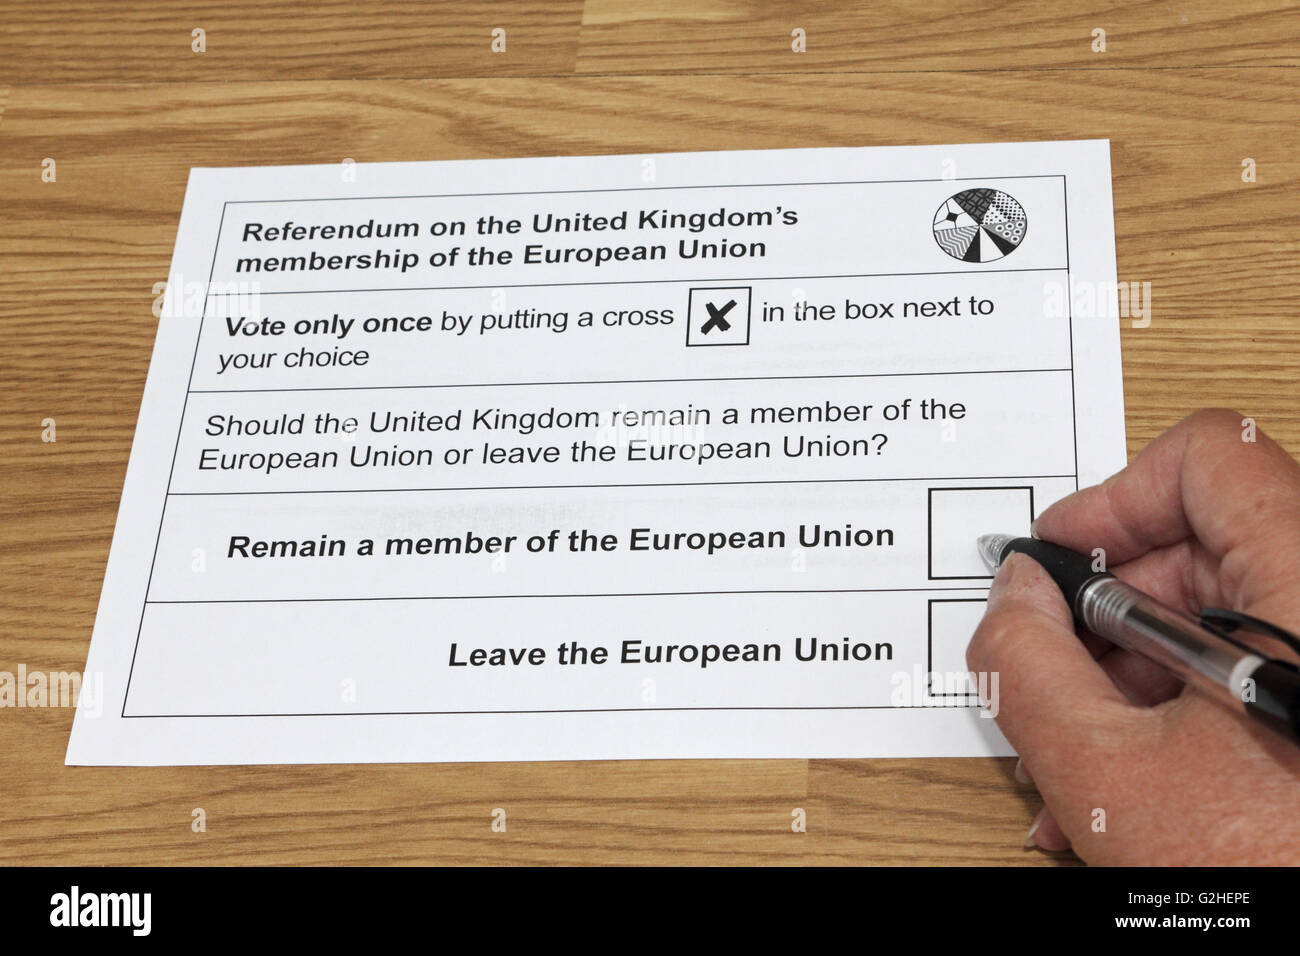 Epsom, Surrey, England, UK. 30th May 2016. The postal vote for the referendum on the United Kingdom's membership of the European Union has been delivered today, ahead of polling day on the 23rd June. Stock Photo